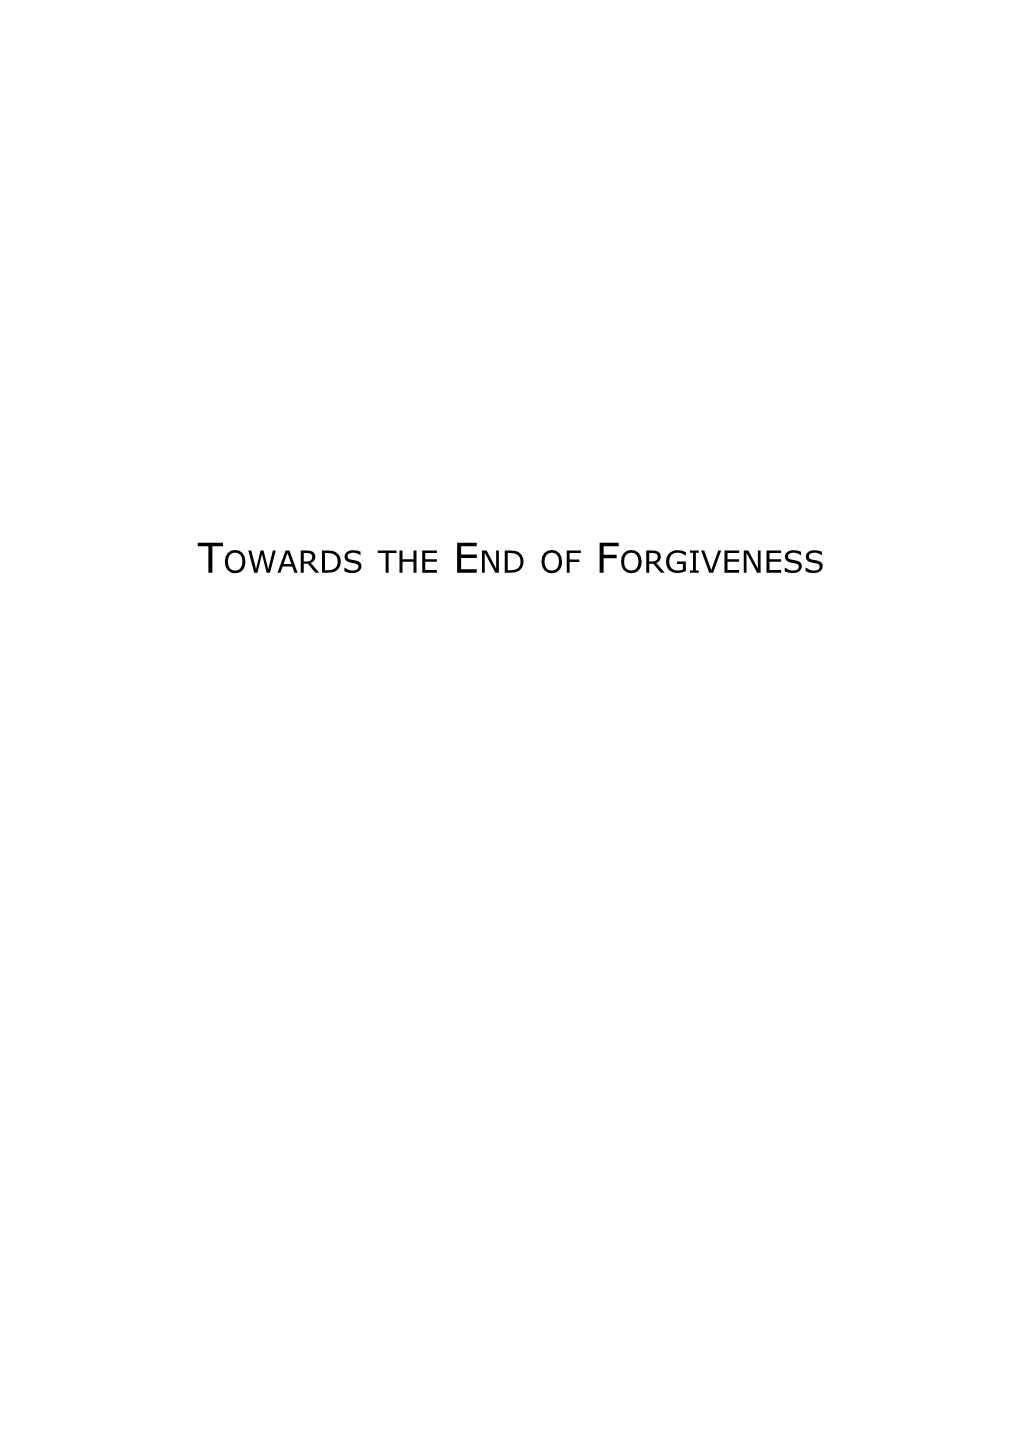 Towards the End of Forgiveness